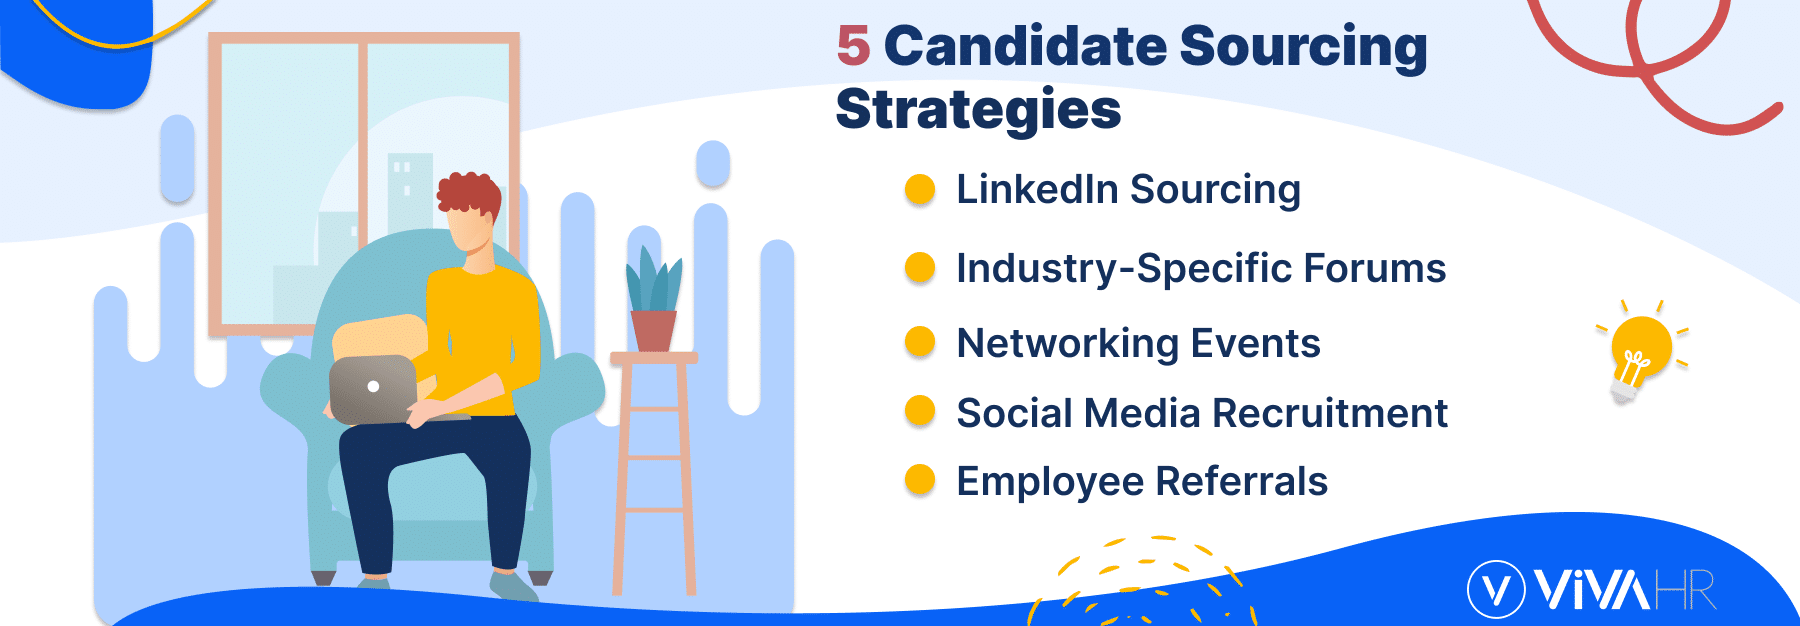 Creative Candidate Sourcing Strategies For Smbs